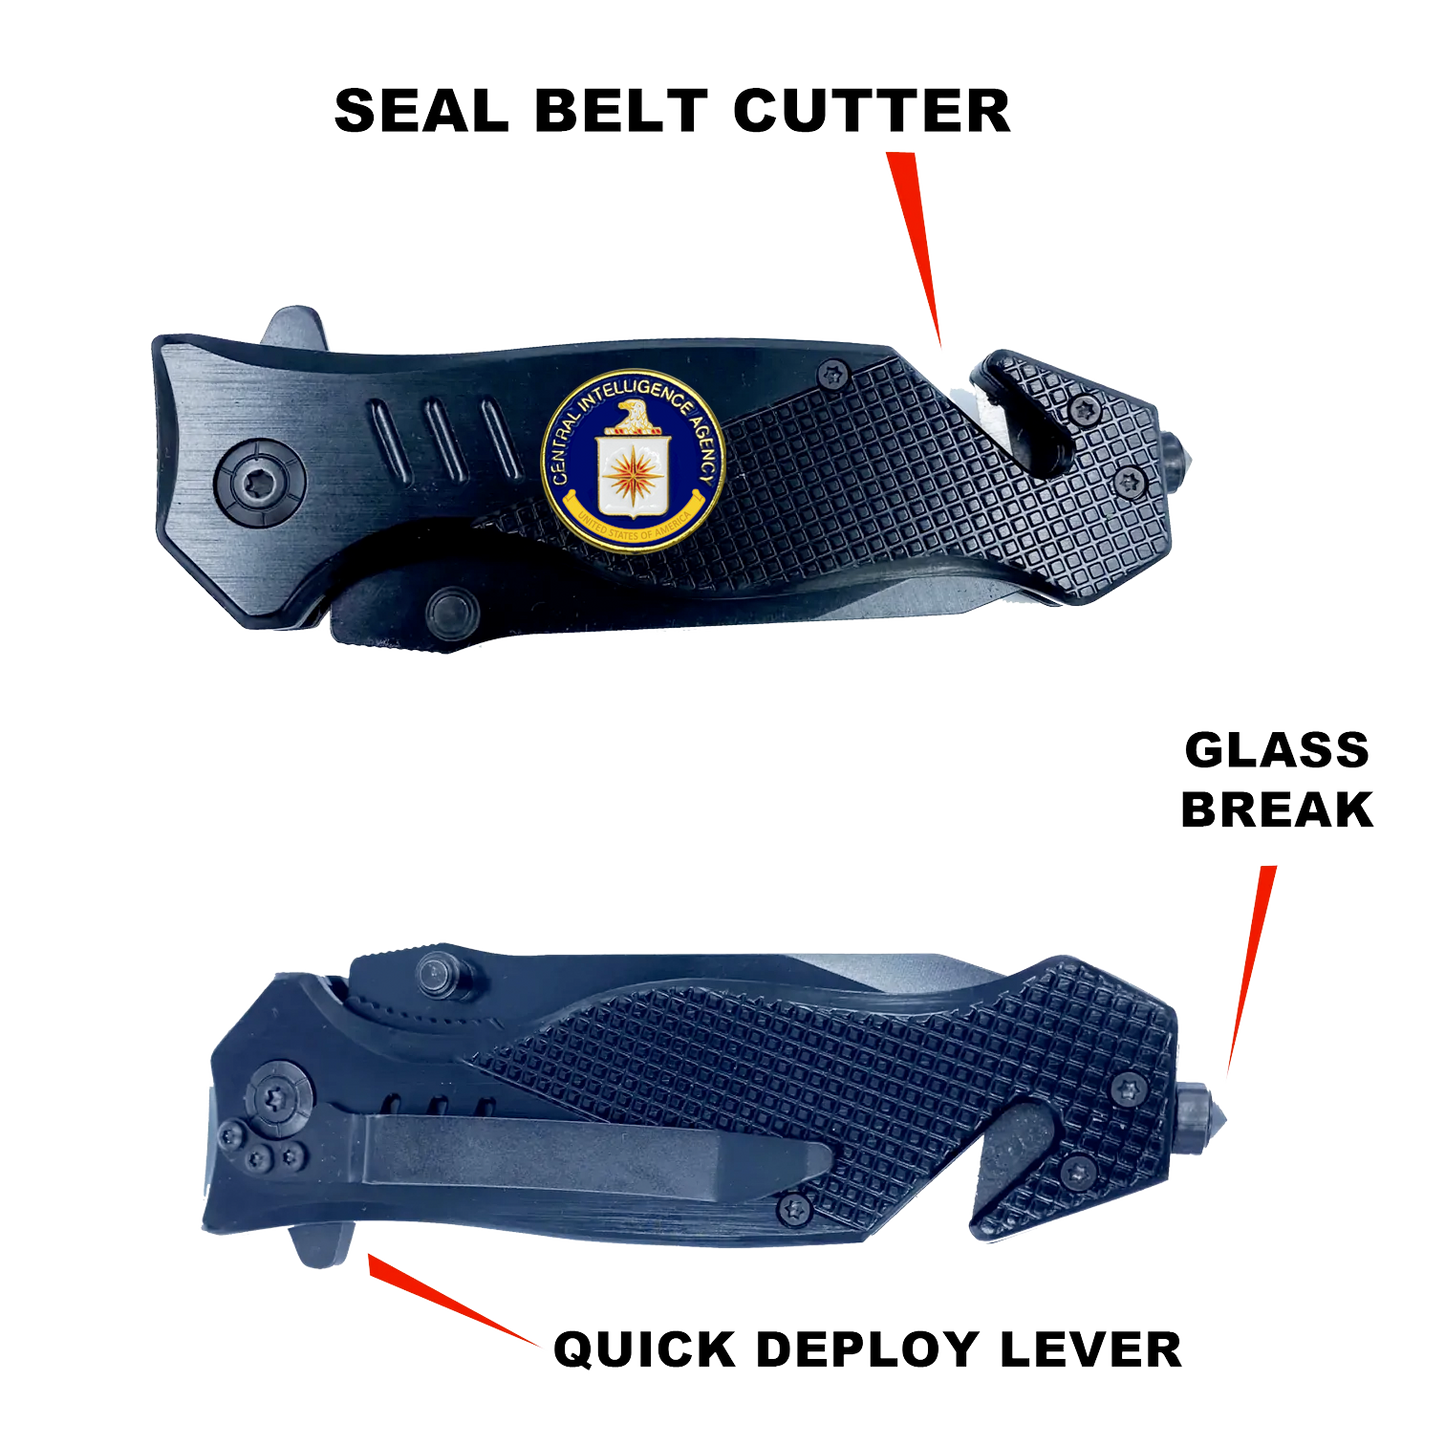 CIA Central Intelligence Agency 3-in-1 Tactical Rescue knife tool with Seatbelt Cutter, Steel Serrated Blade, Glass